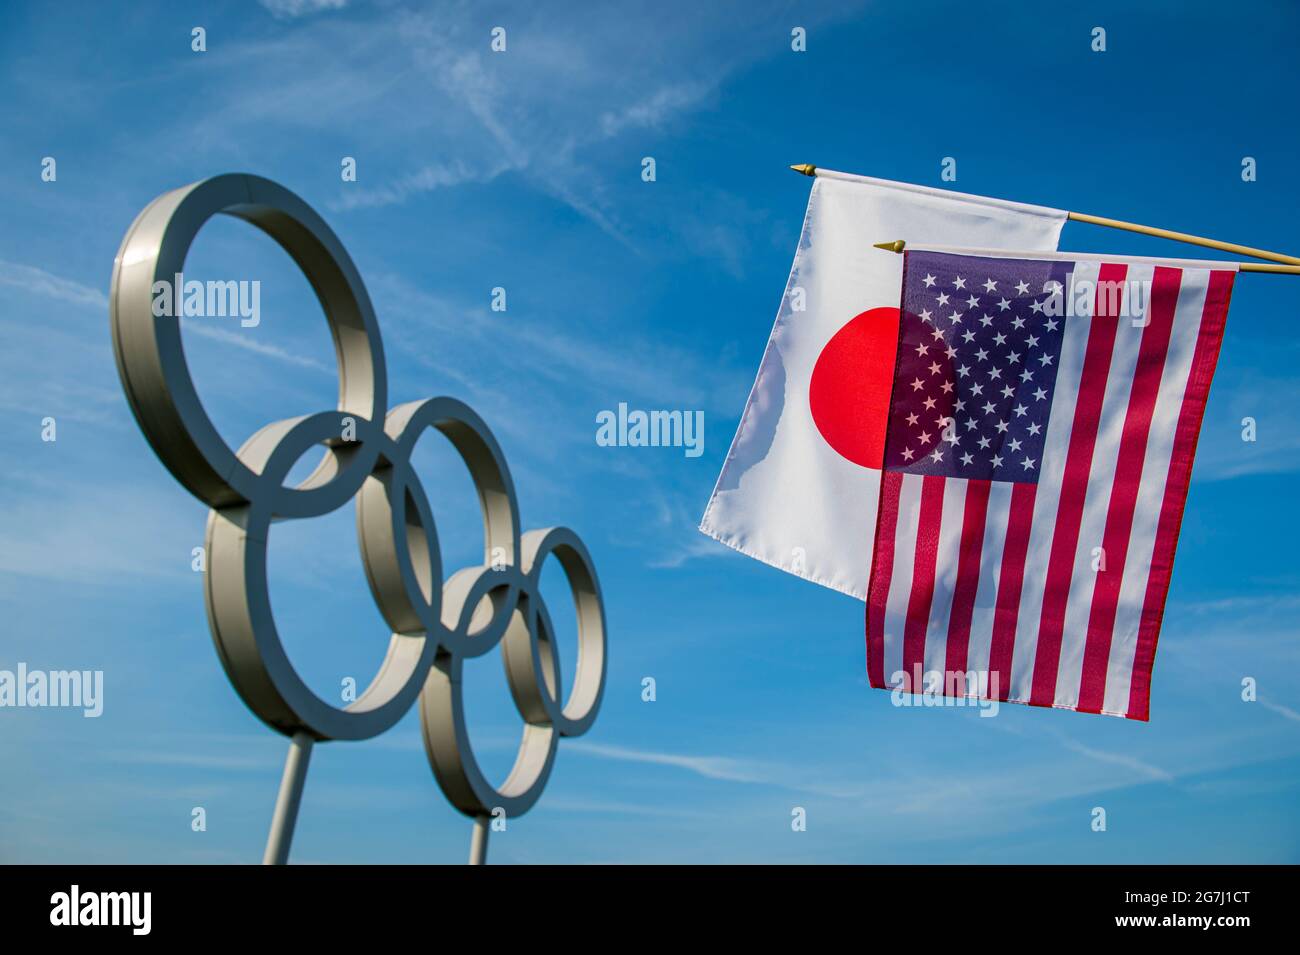 RIO DE JANEIRO - MARCH, 2016: Flags of USA and Japan hang together in front of a large set of shiny metallic Olympic Rings under bright blue sky. Stock Photo